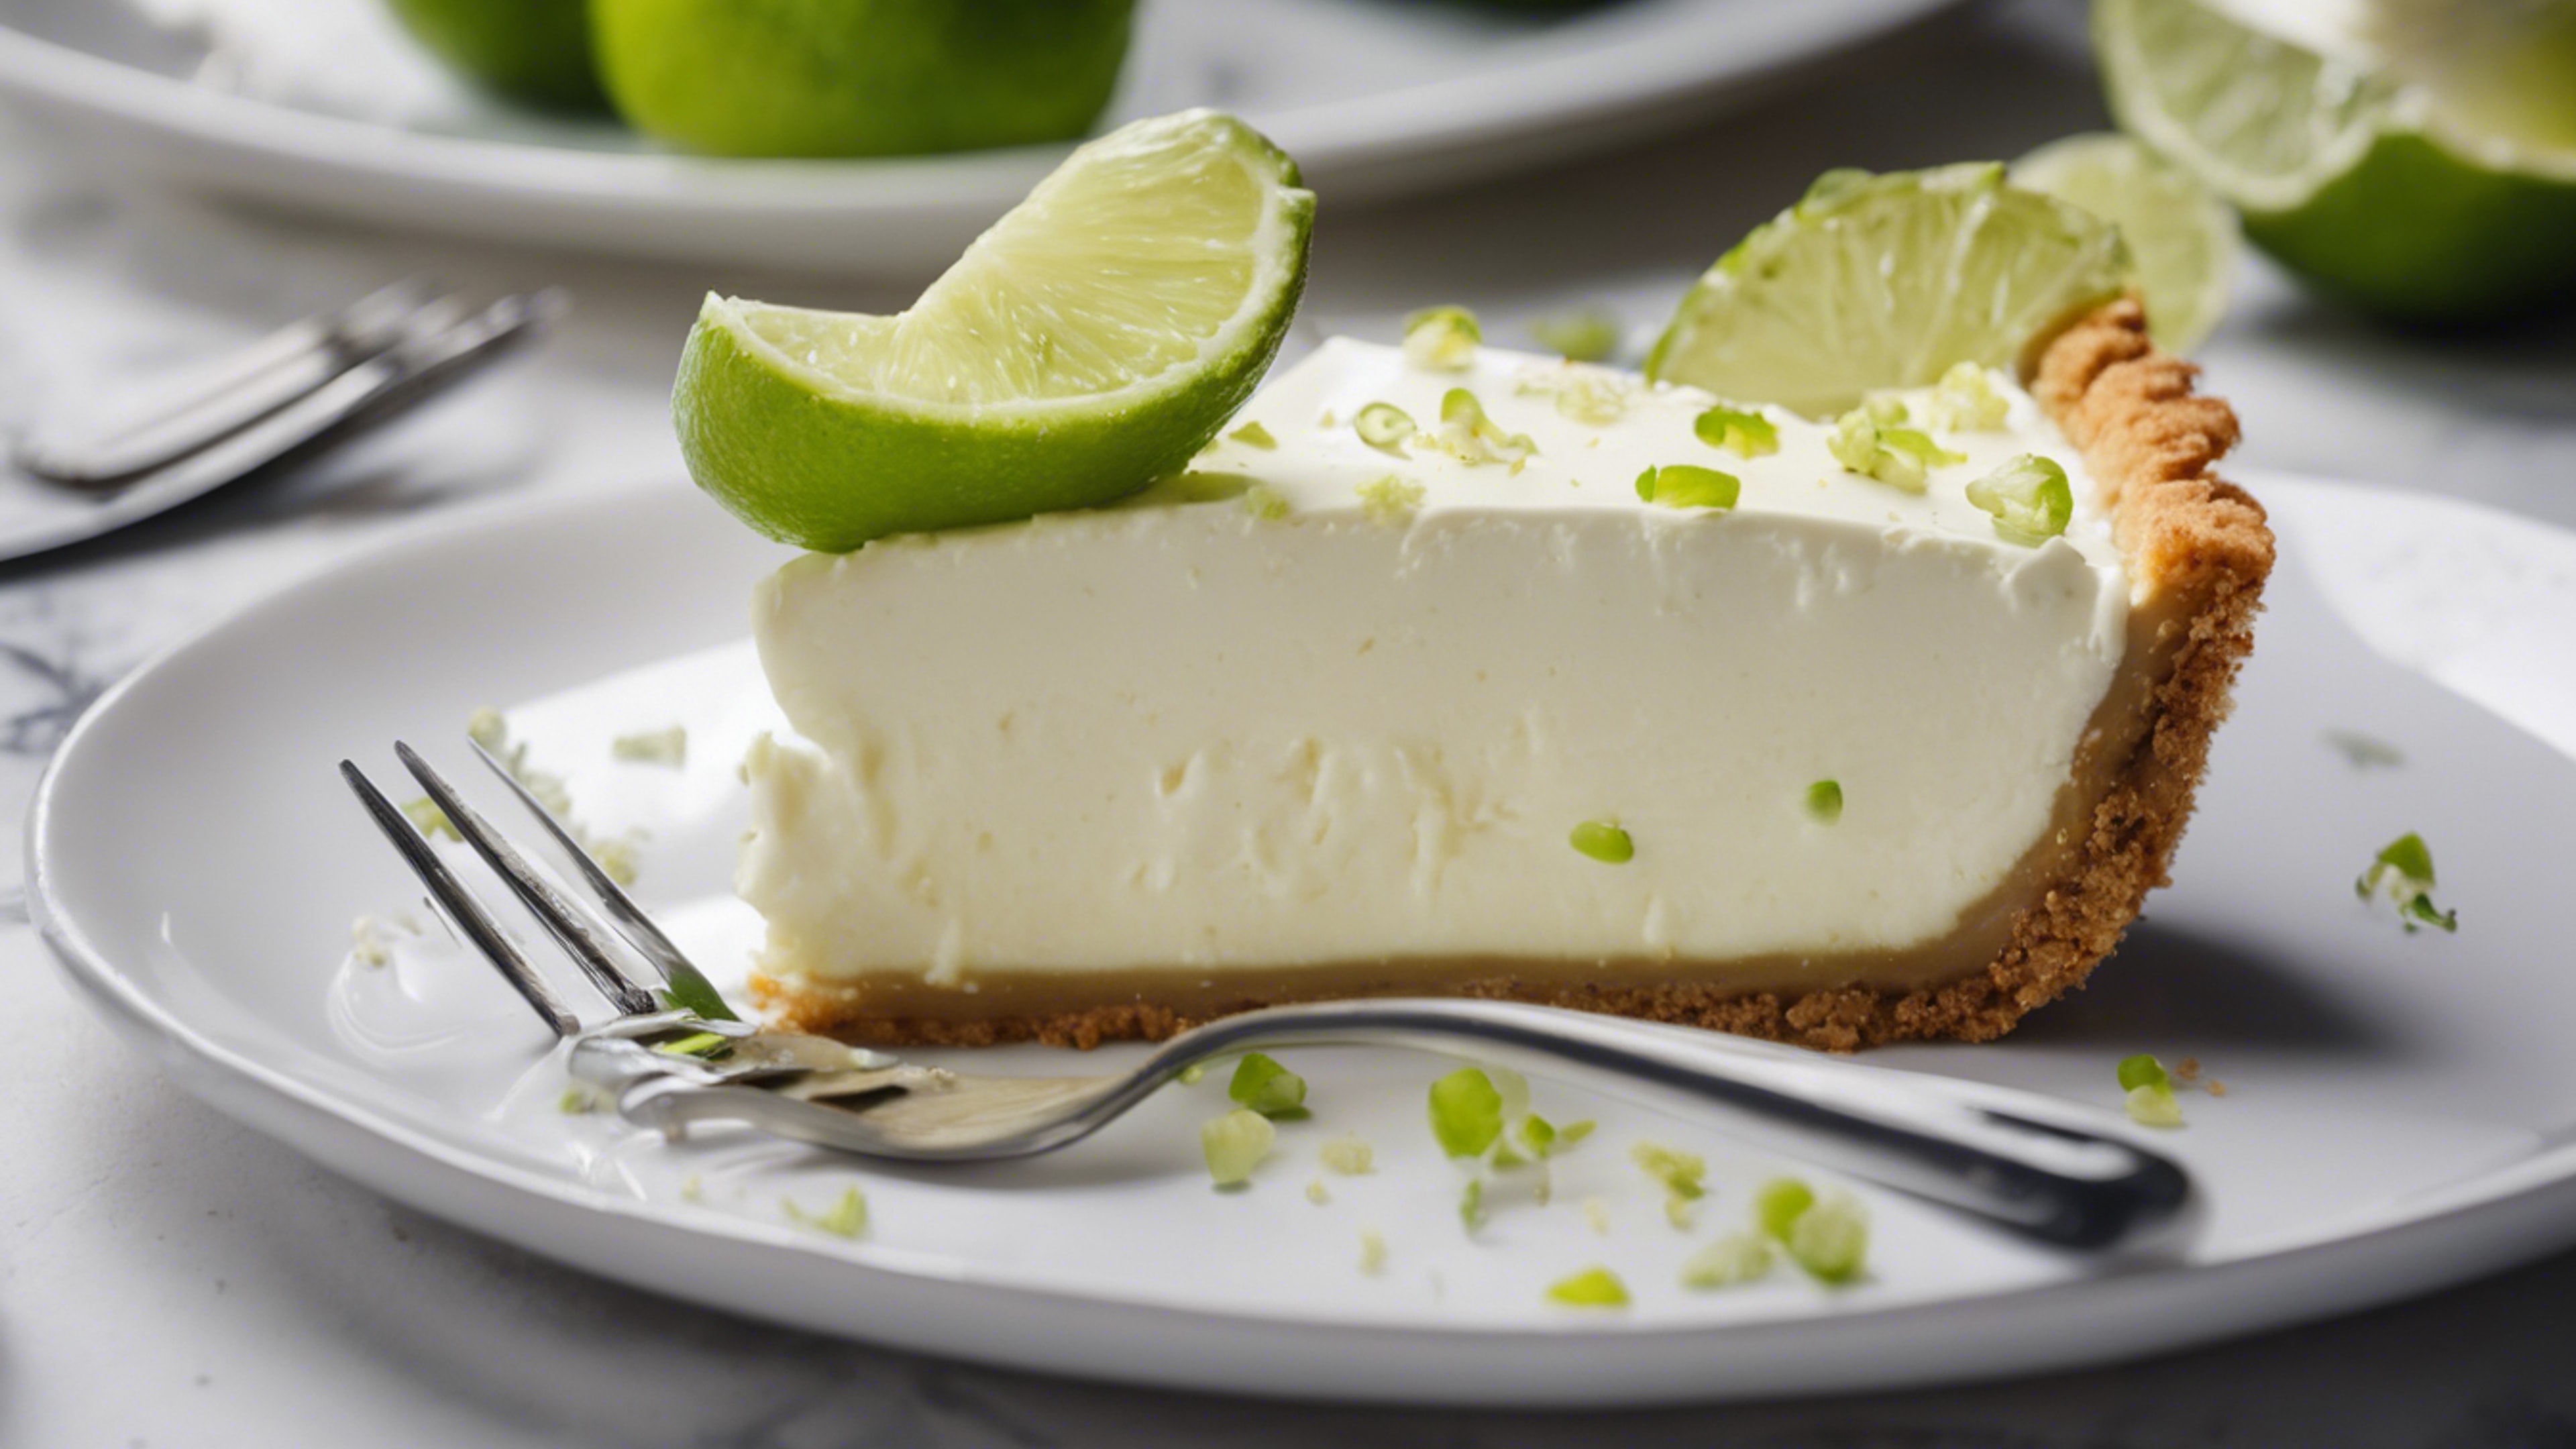 Delicious key lime pie served on a white ceramic plate with a silver fork. 벽지[dc9d1e1923f243919b66]